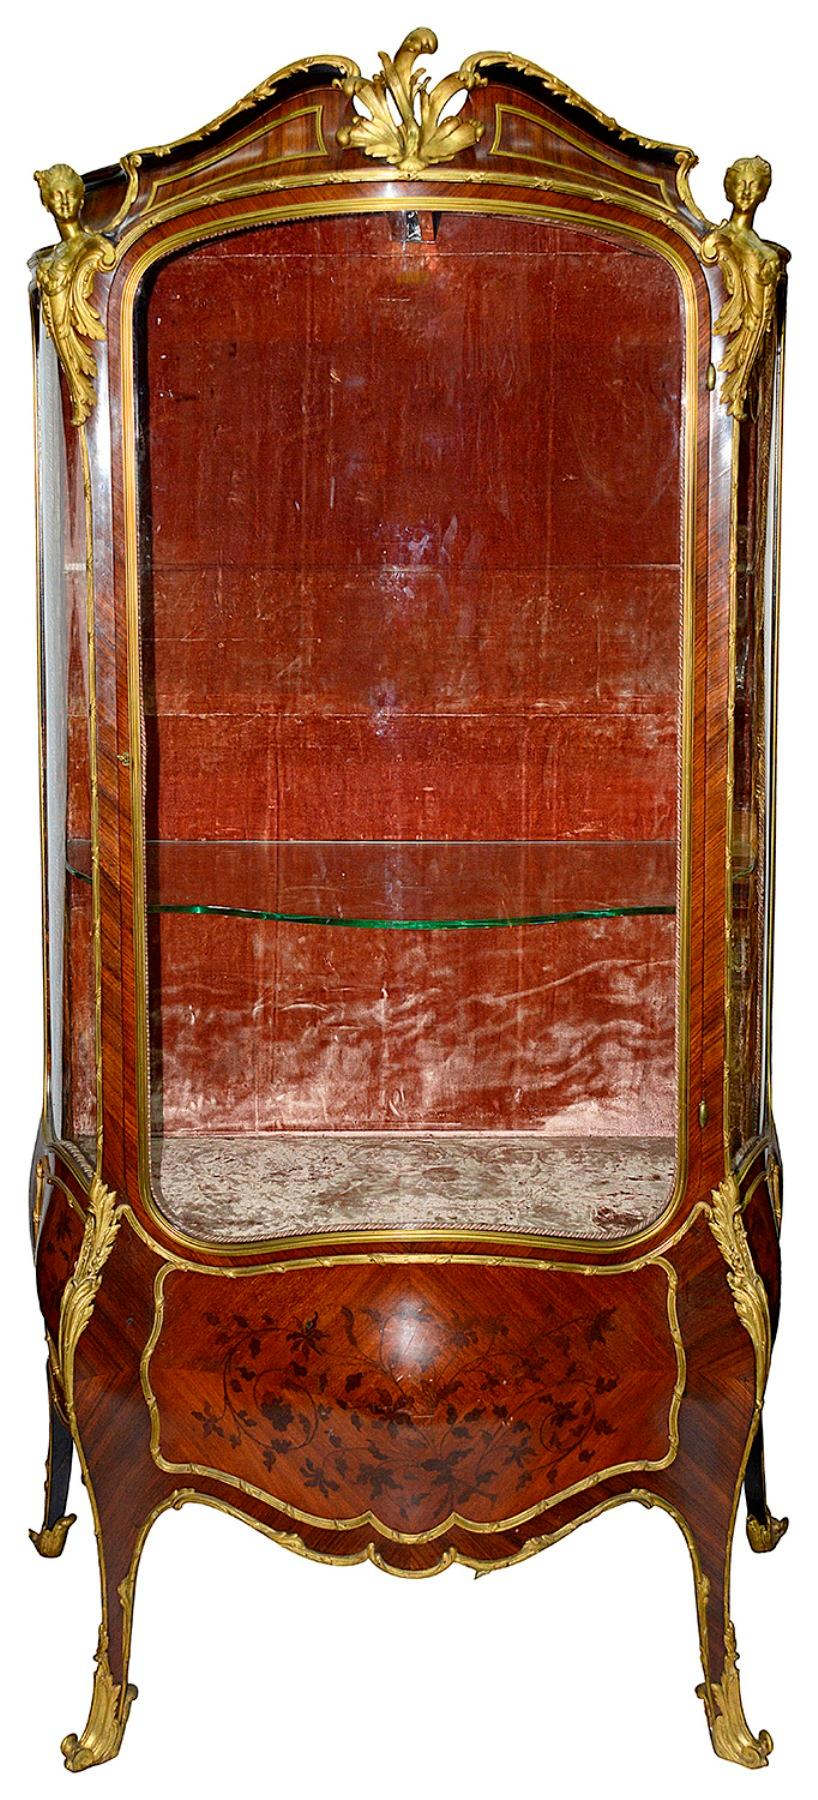 A fine quality 19th century French Louis XVI style bombe fronted vitrine, having wonderful quality gilded ormolu female monopodia mounts, floral marquetry inlaid panels to the sides and door front, that opens to reveal adjustable glass shelves